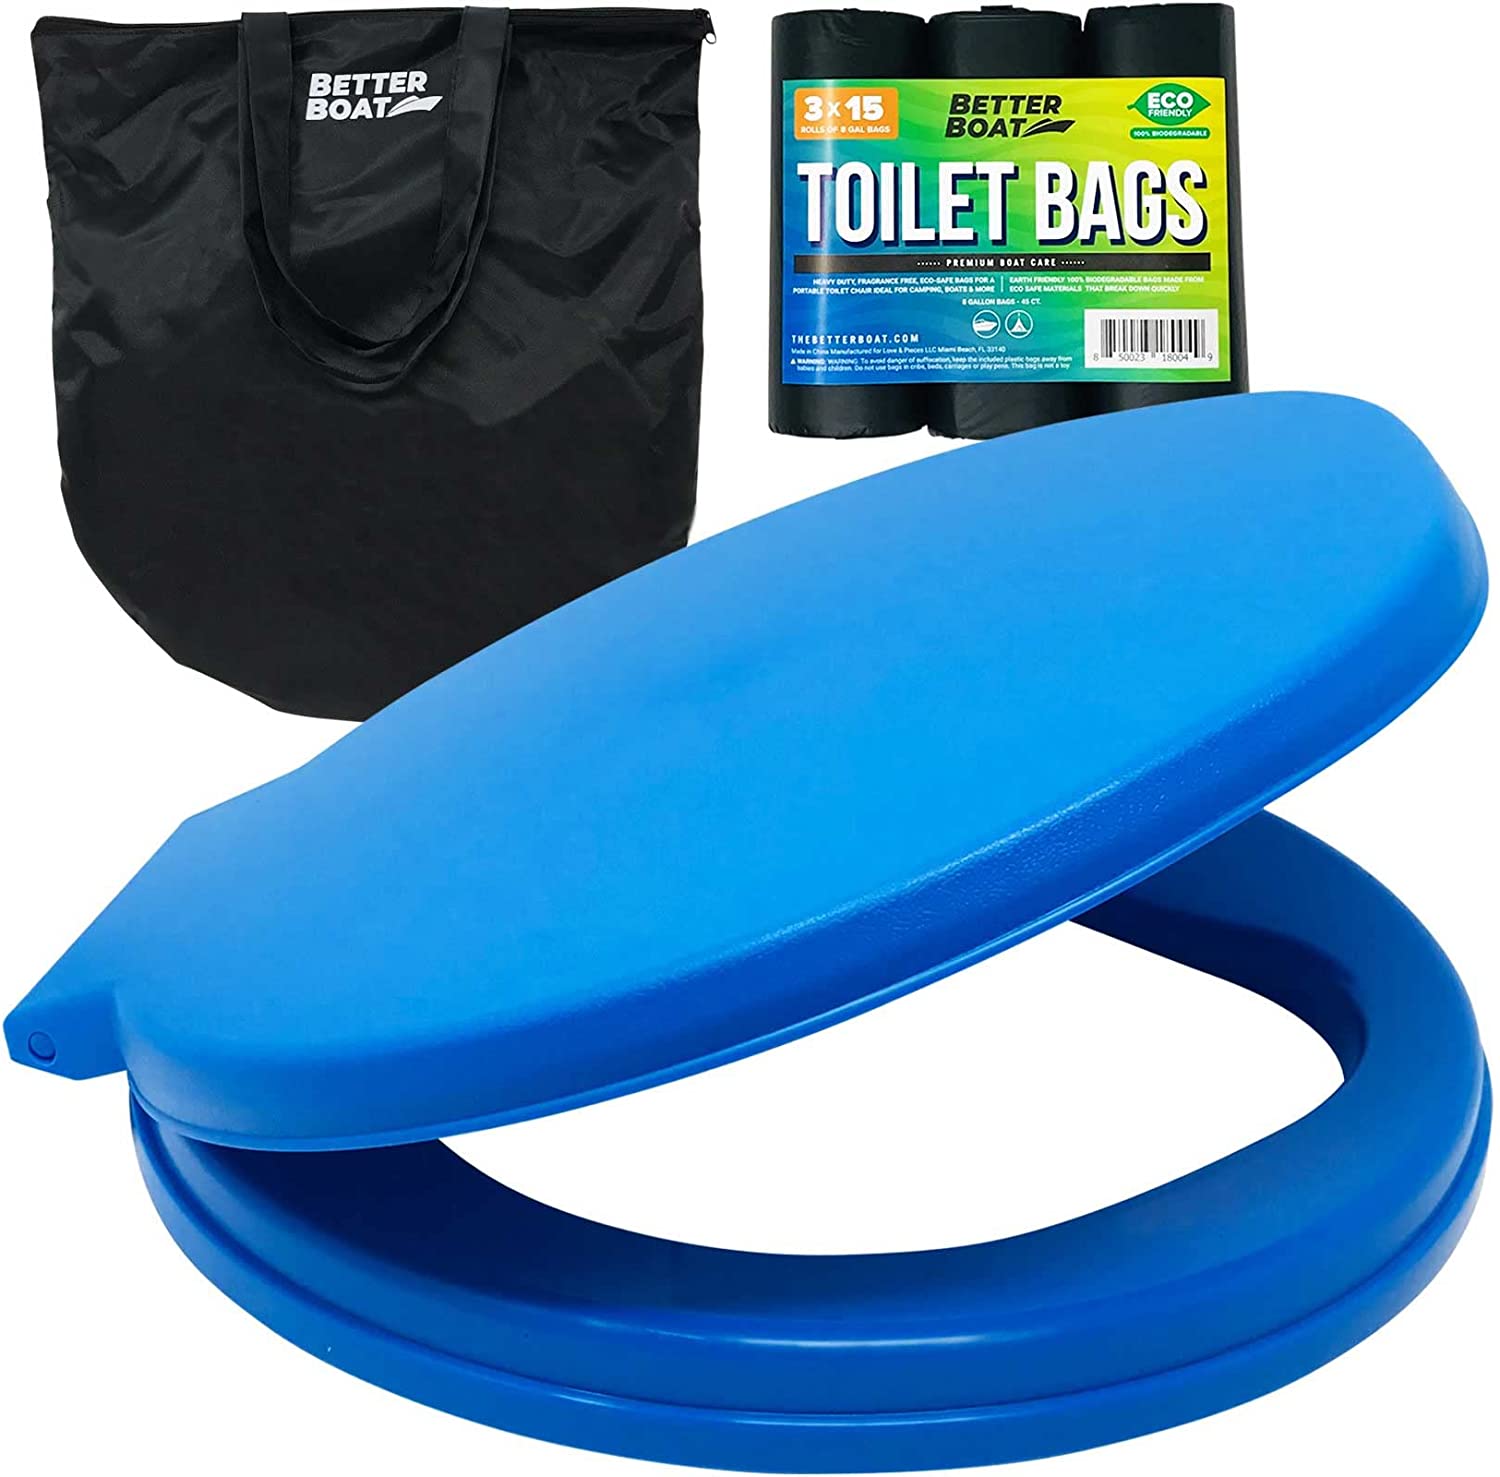 Better Boat Biodegradeable Bags & Toilet Seat For Bucket